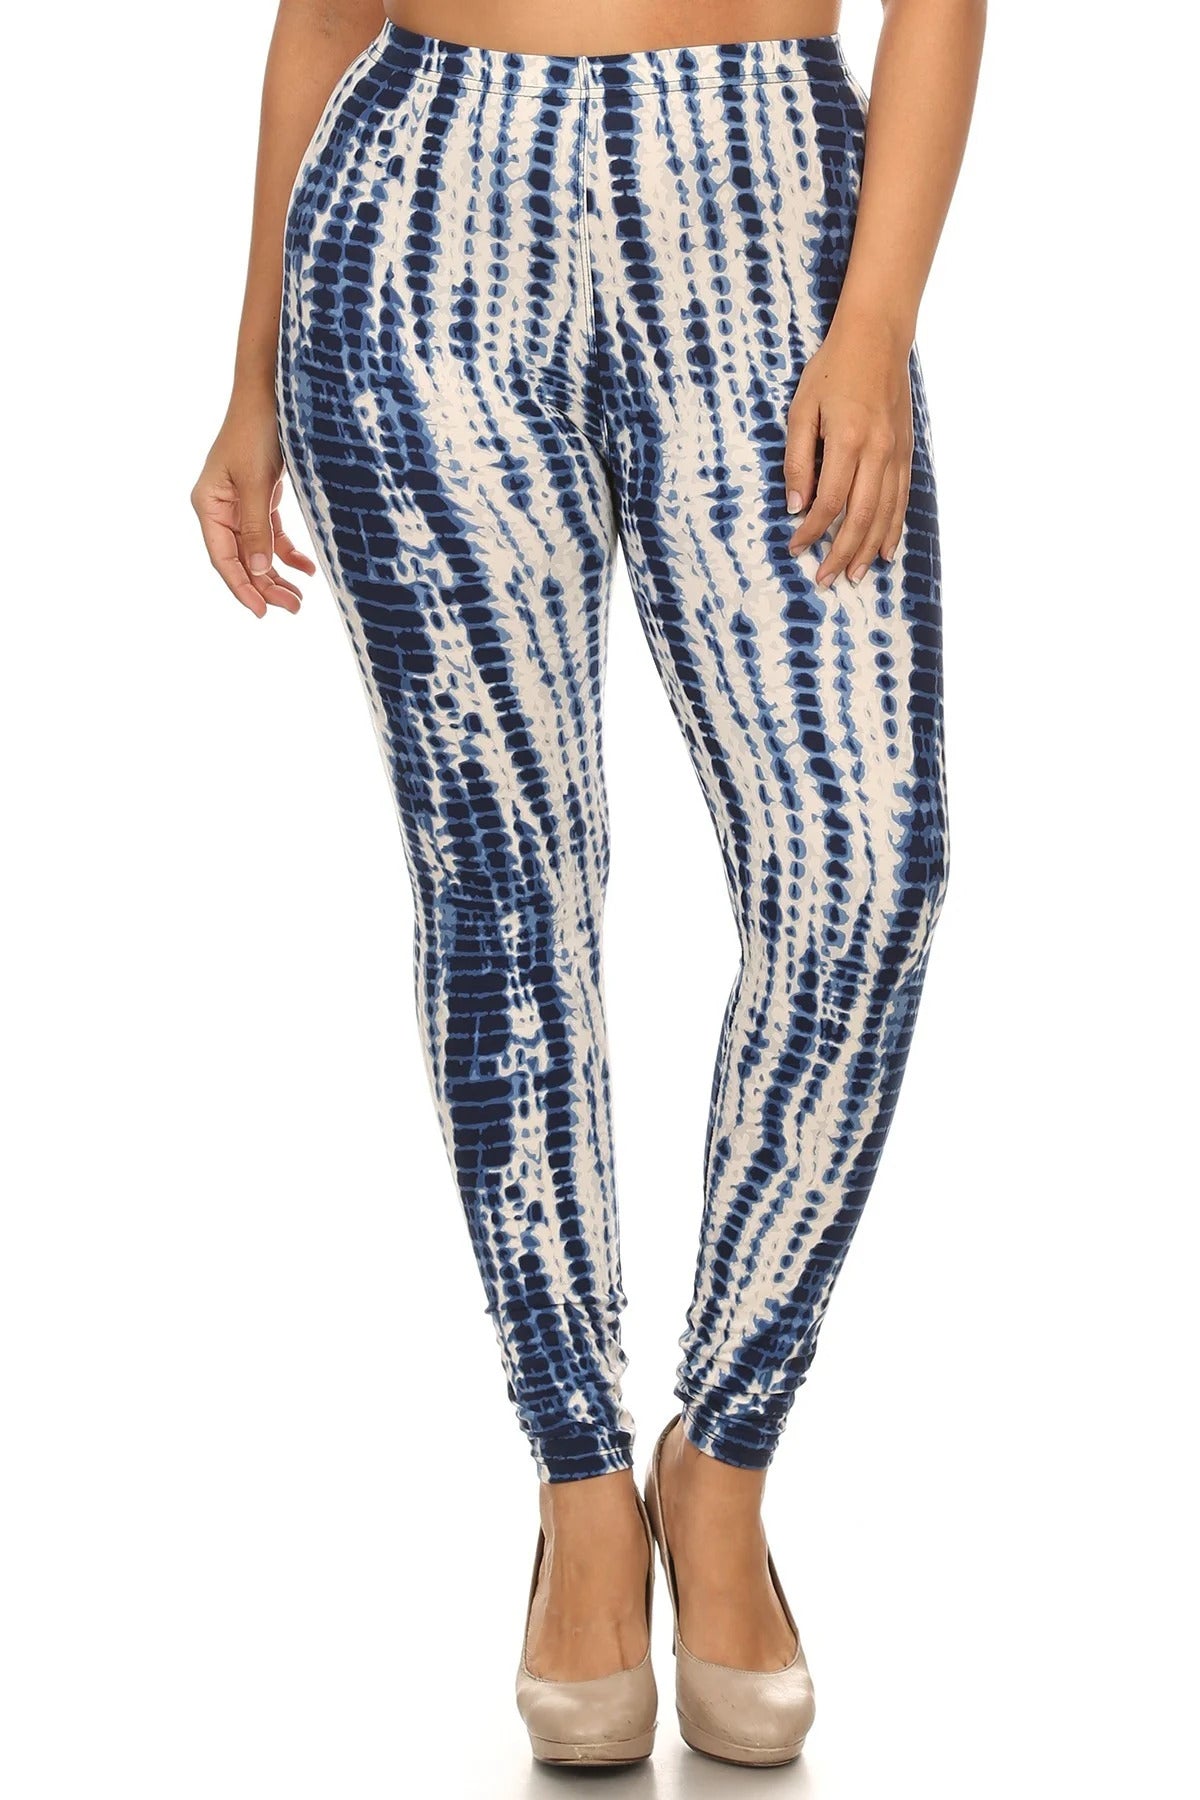 Multi/One Size Fits Most - Voluptuous (+) Plus Size Tie Dye Print, Full Length Leggings In A Slim Fitting Style With A Banded High Waist - womens leggings at TFC&H Co.